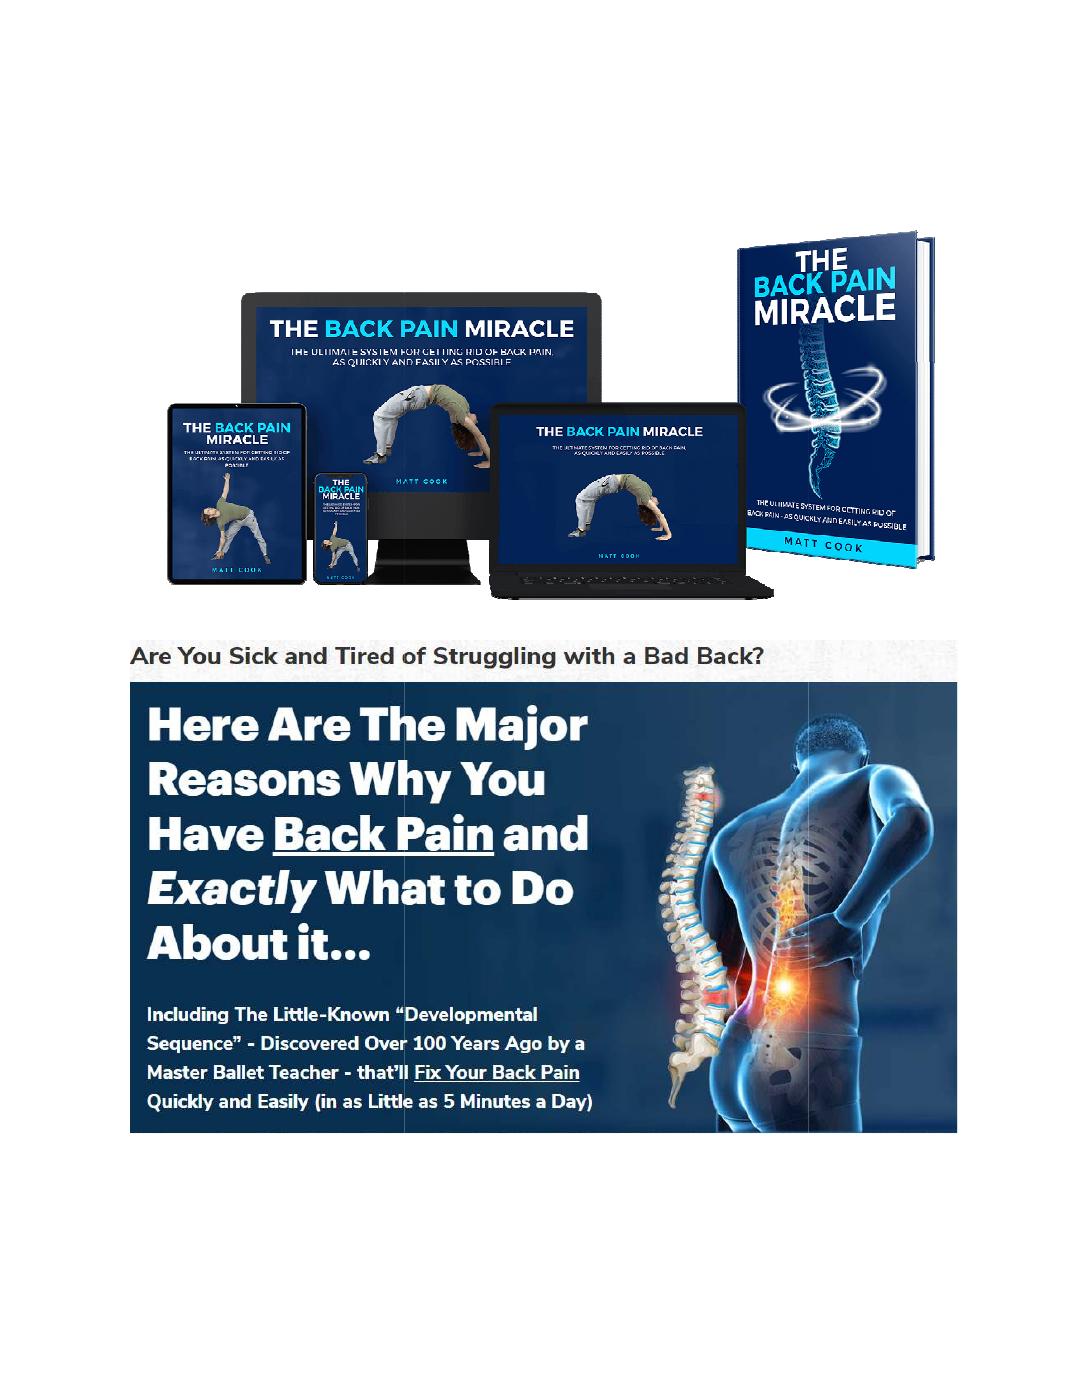 The Back Pain Miracle™ PDF eBook Download by Matt Cook